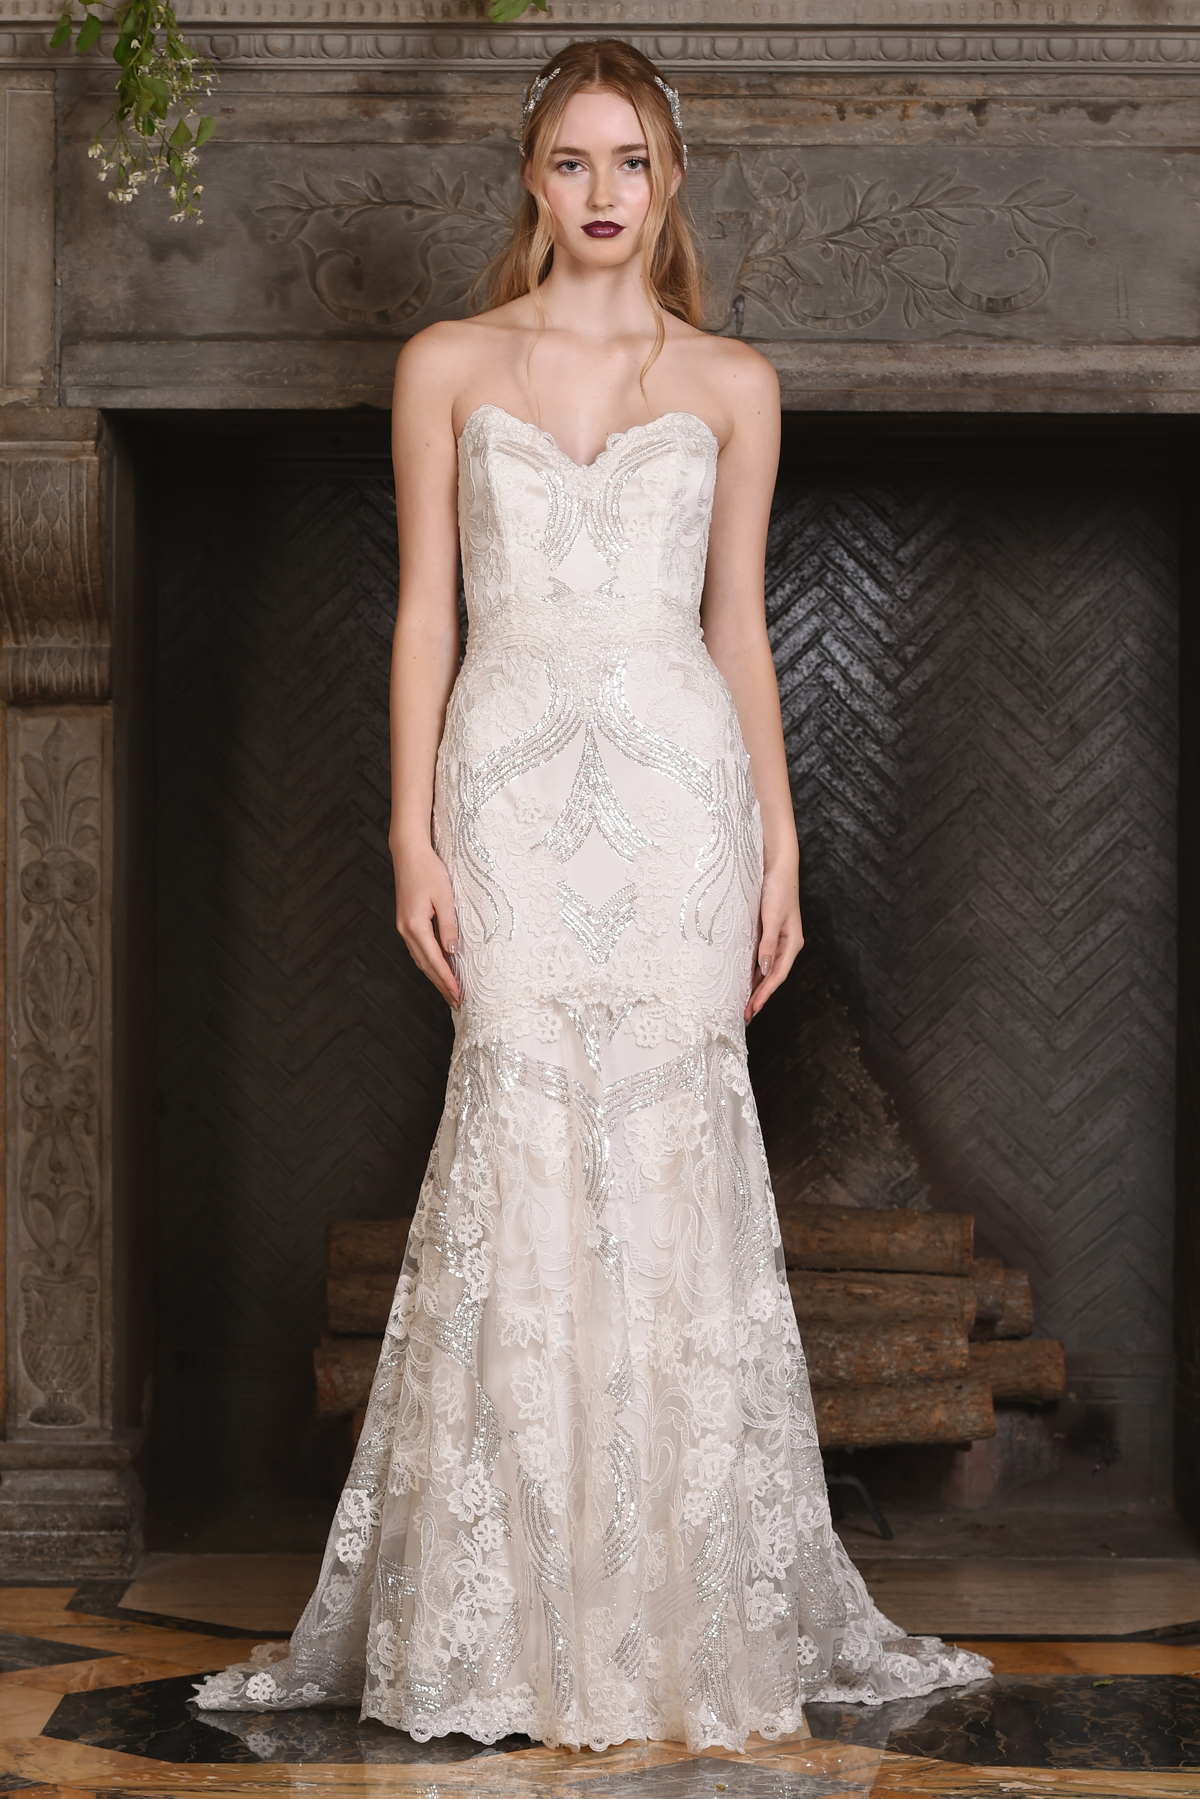 The Celeste gown, from Claire Pettibone's 'The Four Seasons' bridal couture collection for 2017.